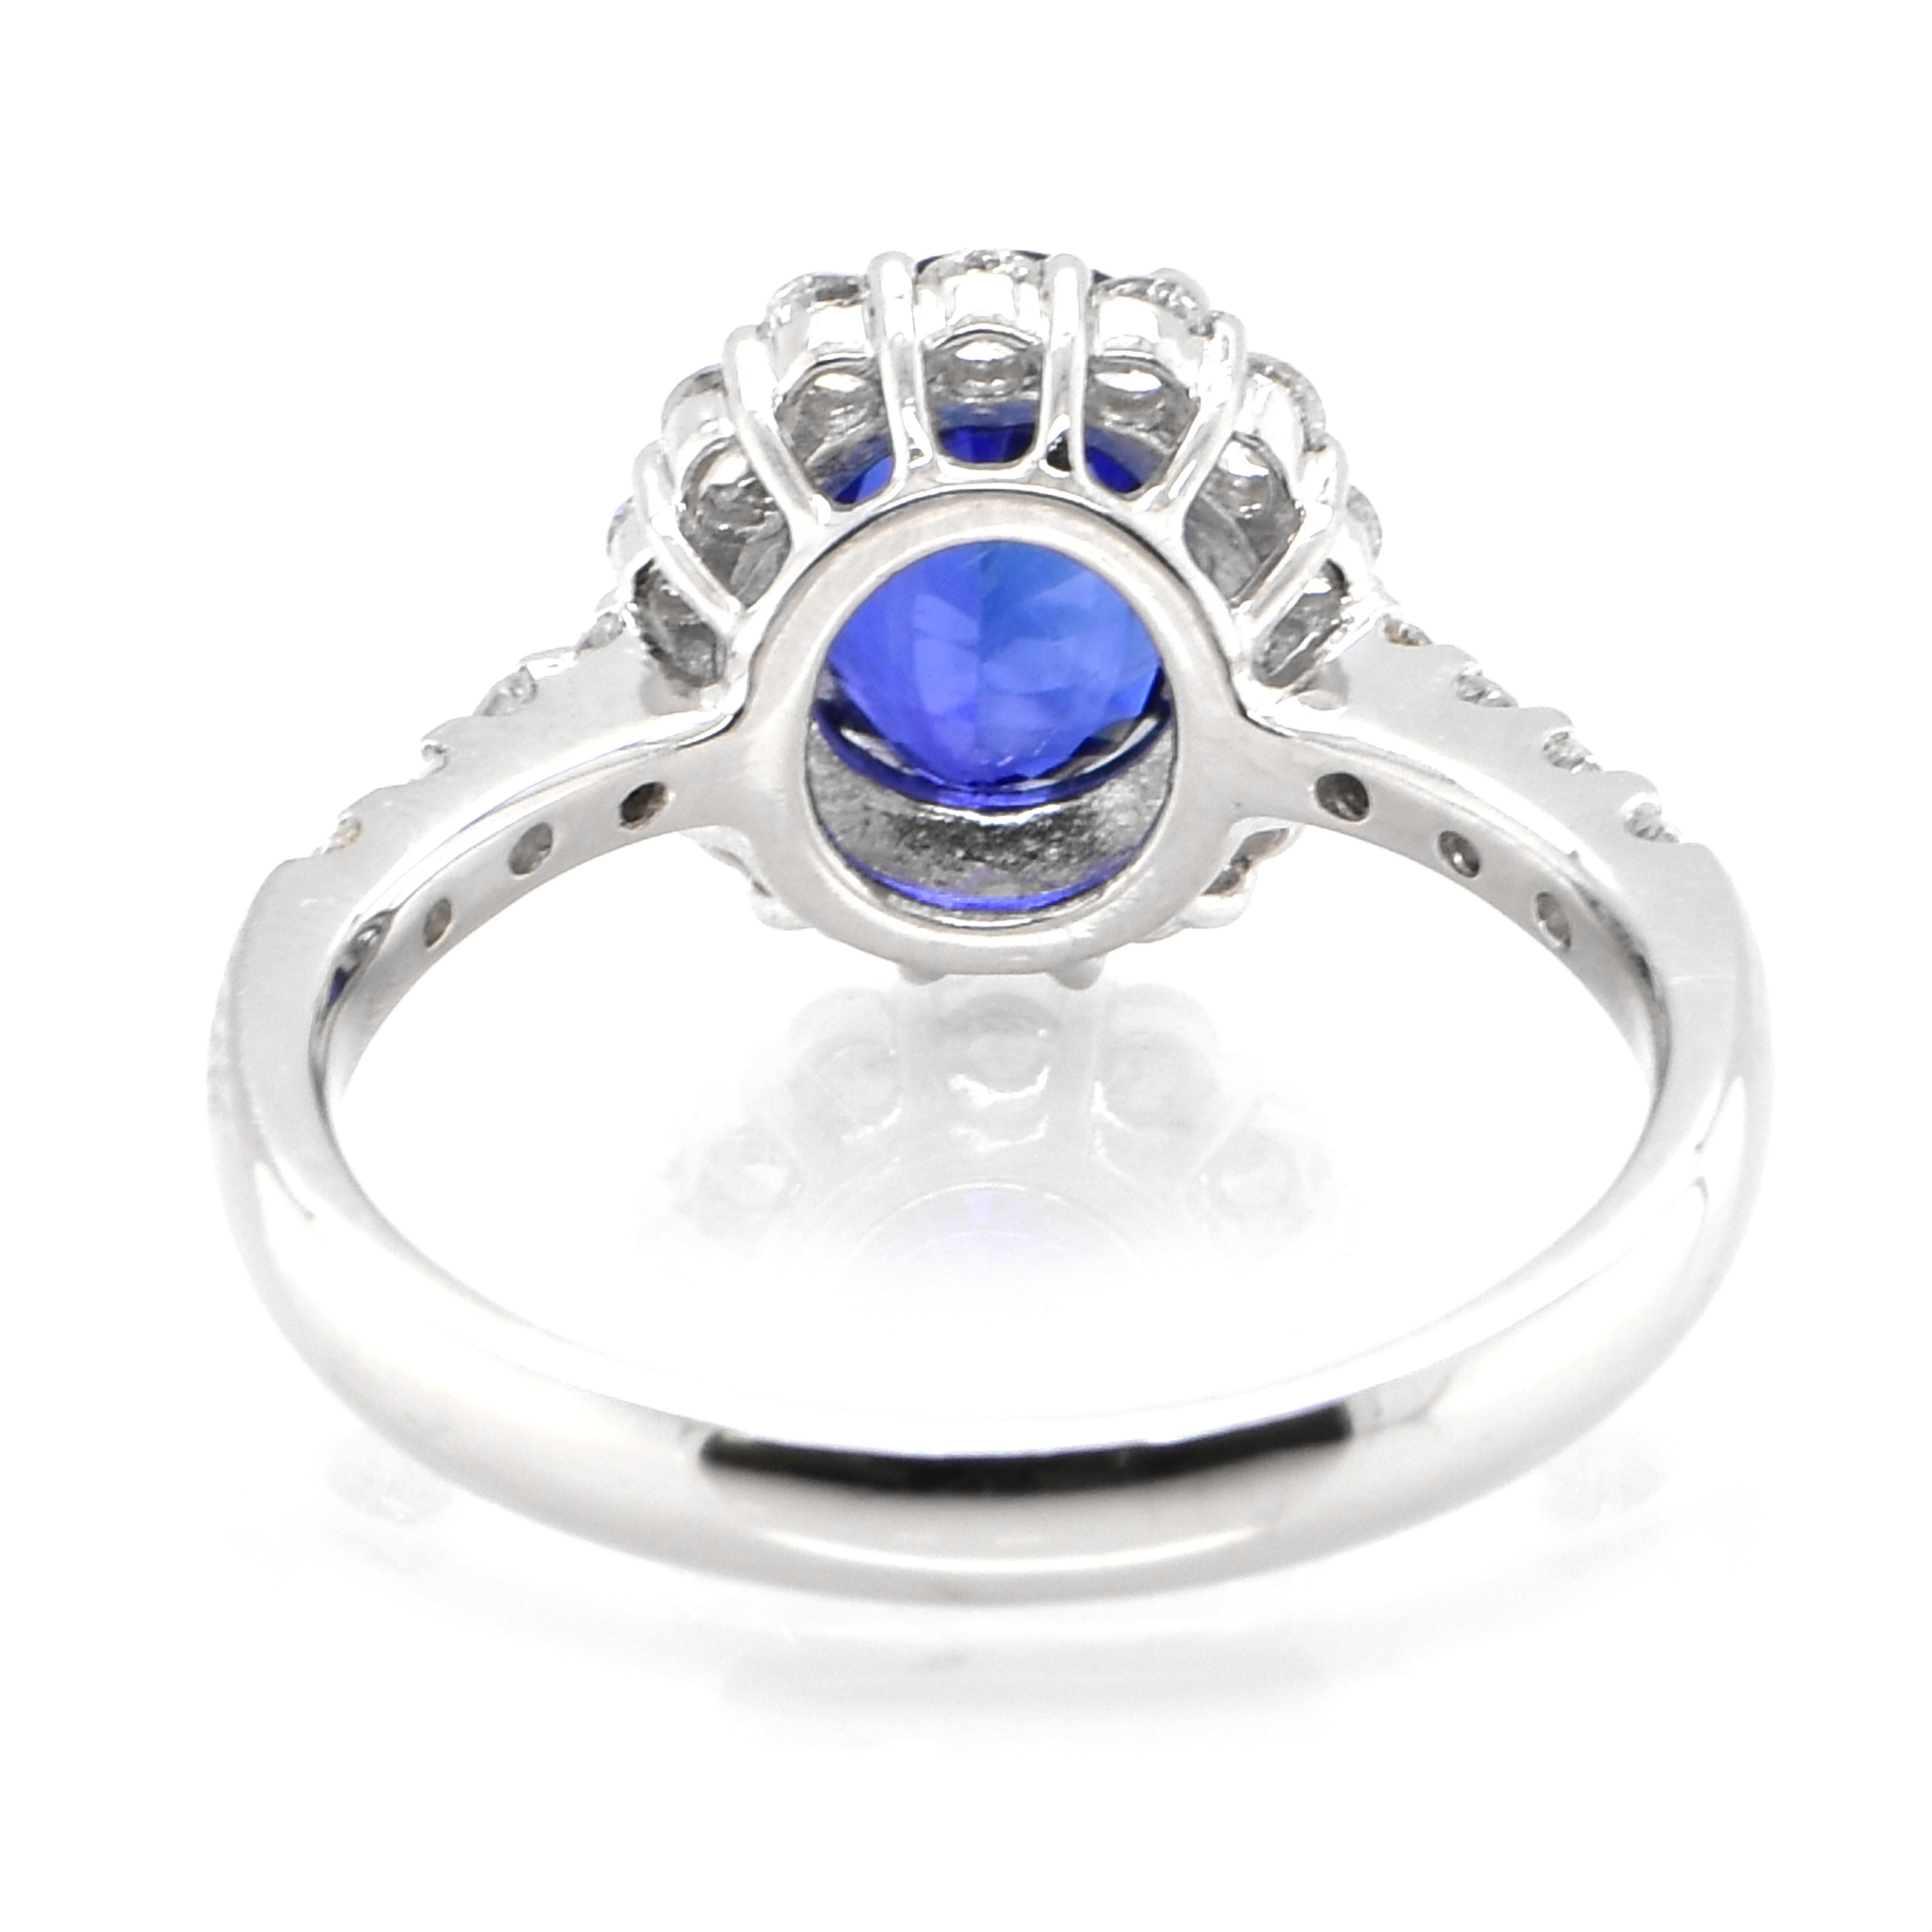 Women's 1.92 Carat Natural Royal Blue Sapphire and Diamond Halo Ring Made in Platinum For Sale